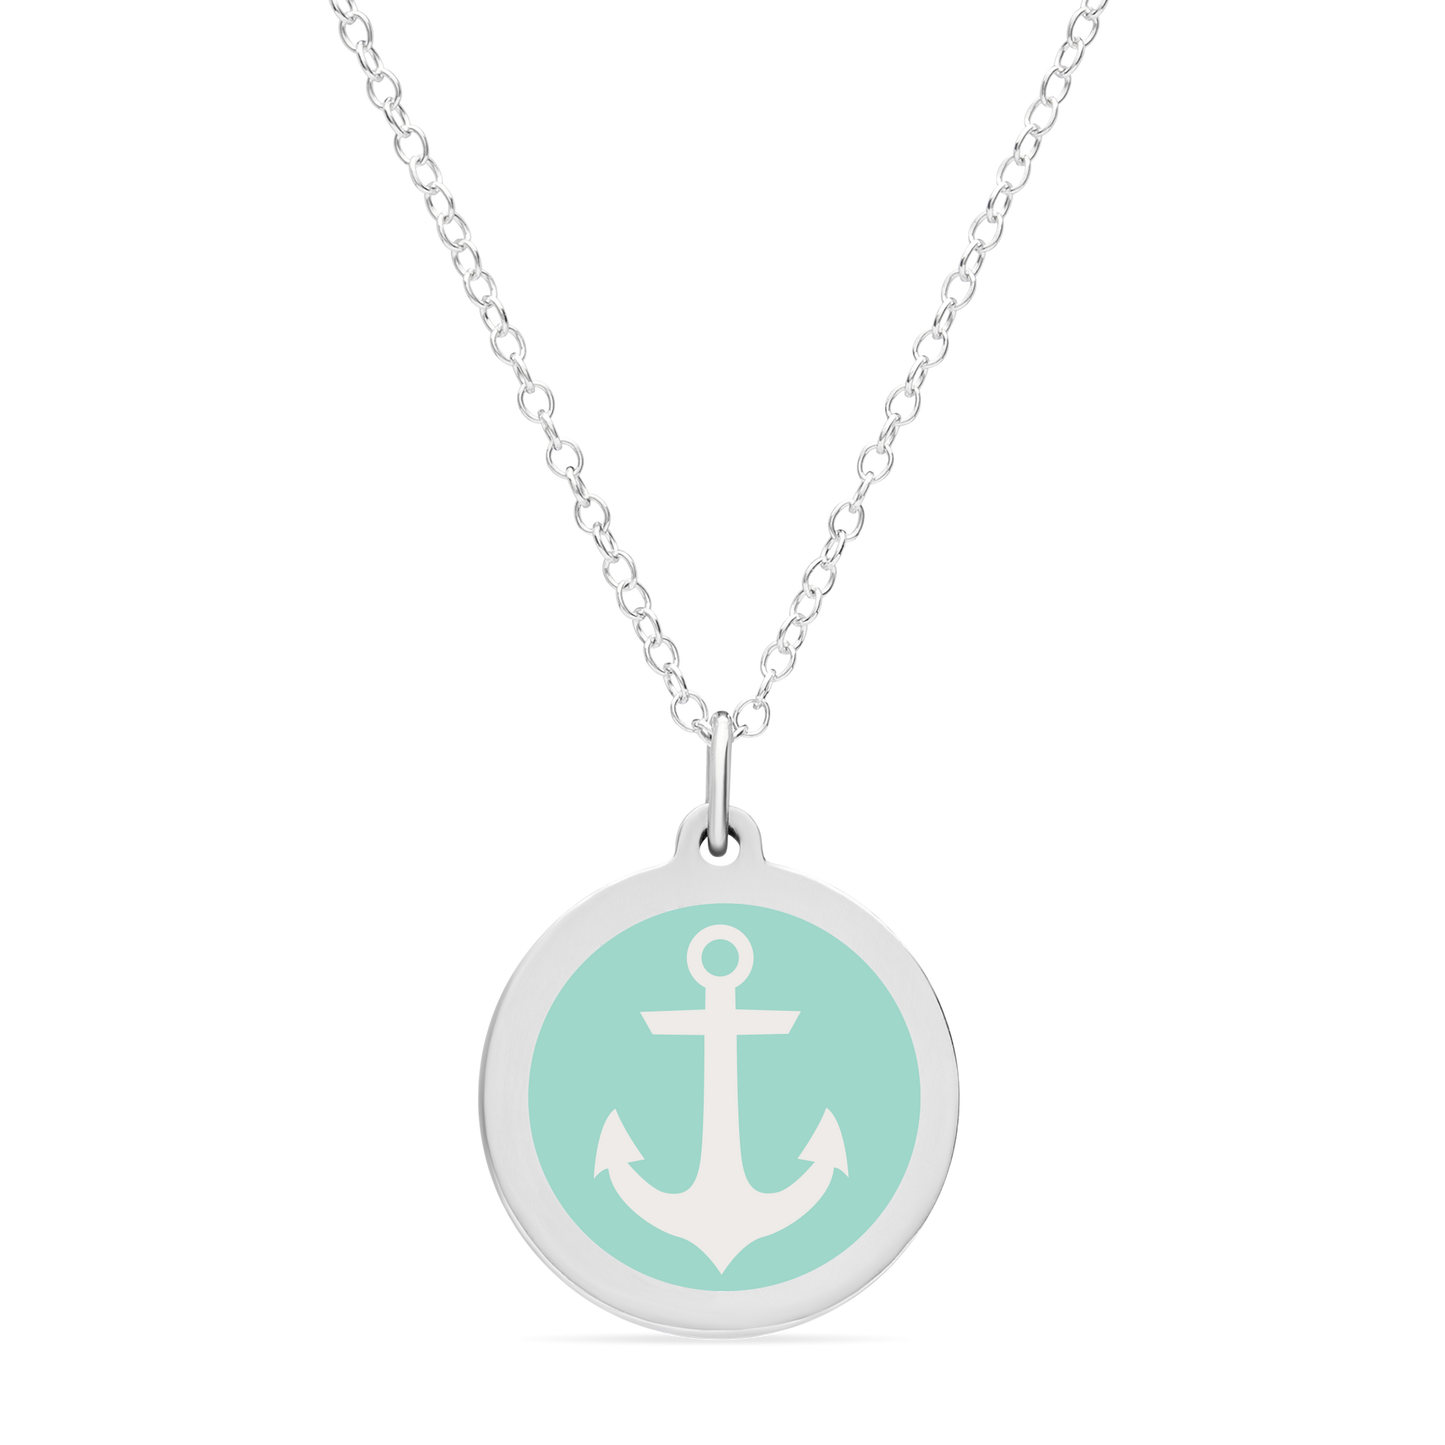 ORIGINAL ANCHOR CHARM in sterling silver with rhodium plate